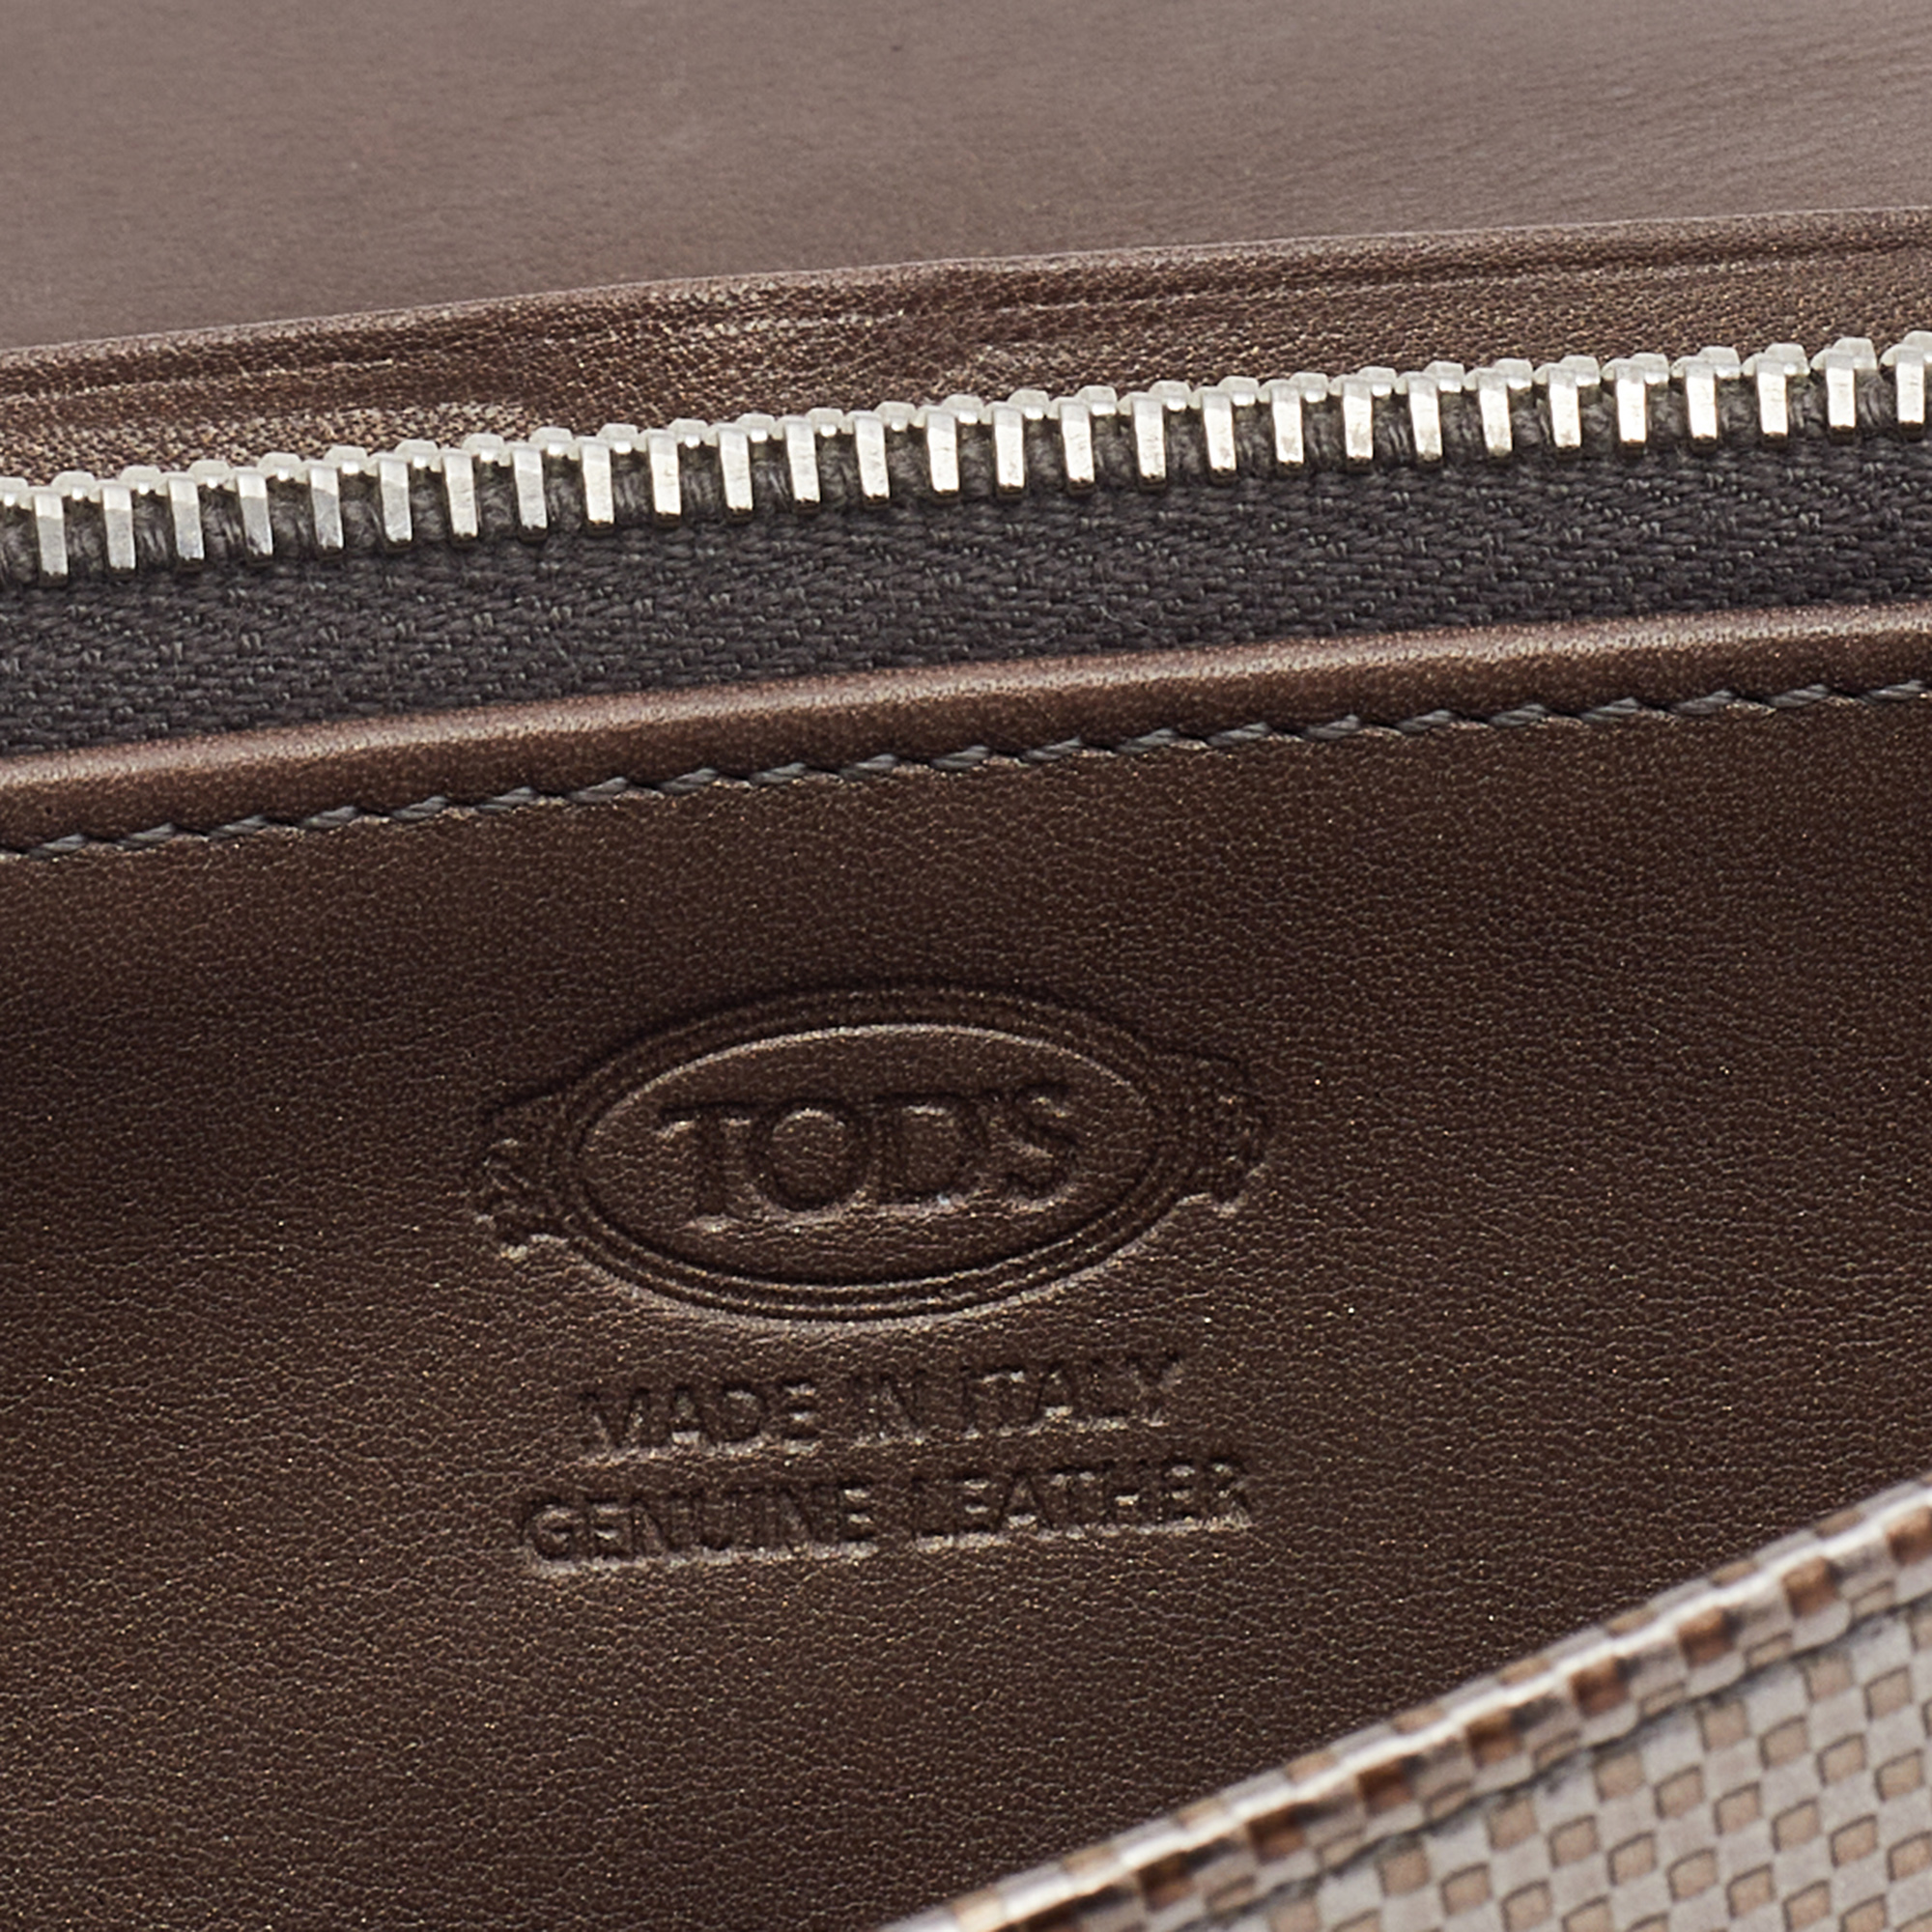 Tod's Metallic Gold Textured Leather Continental Wallet